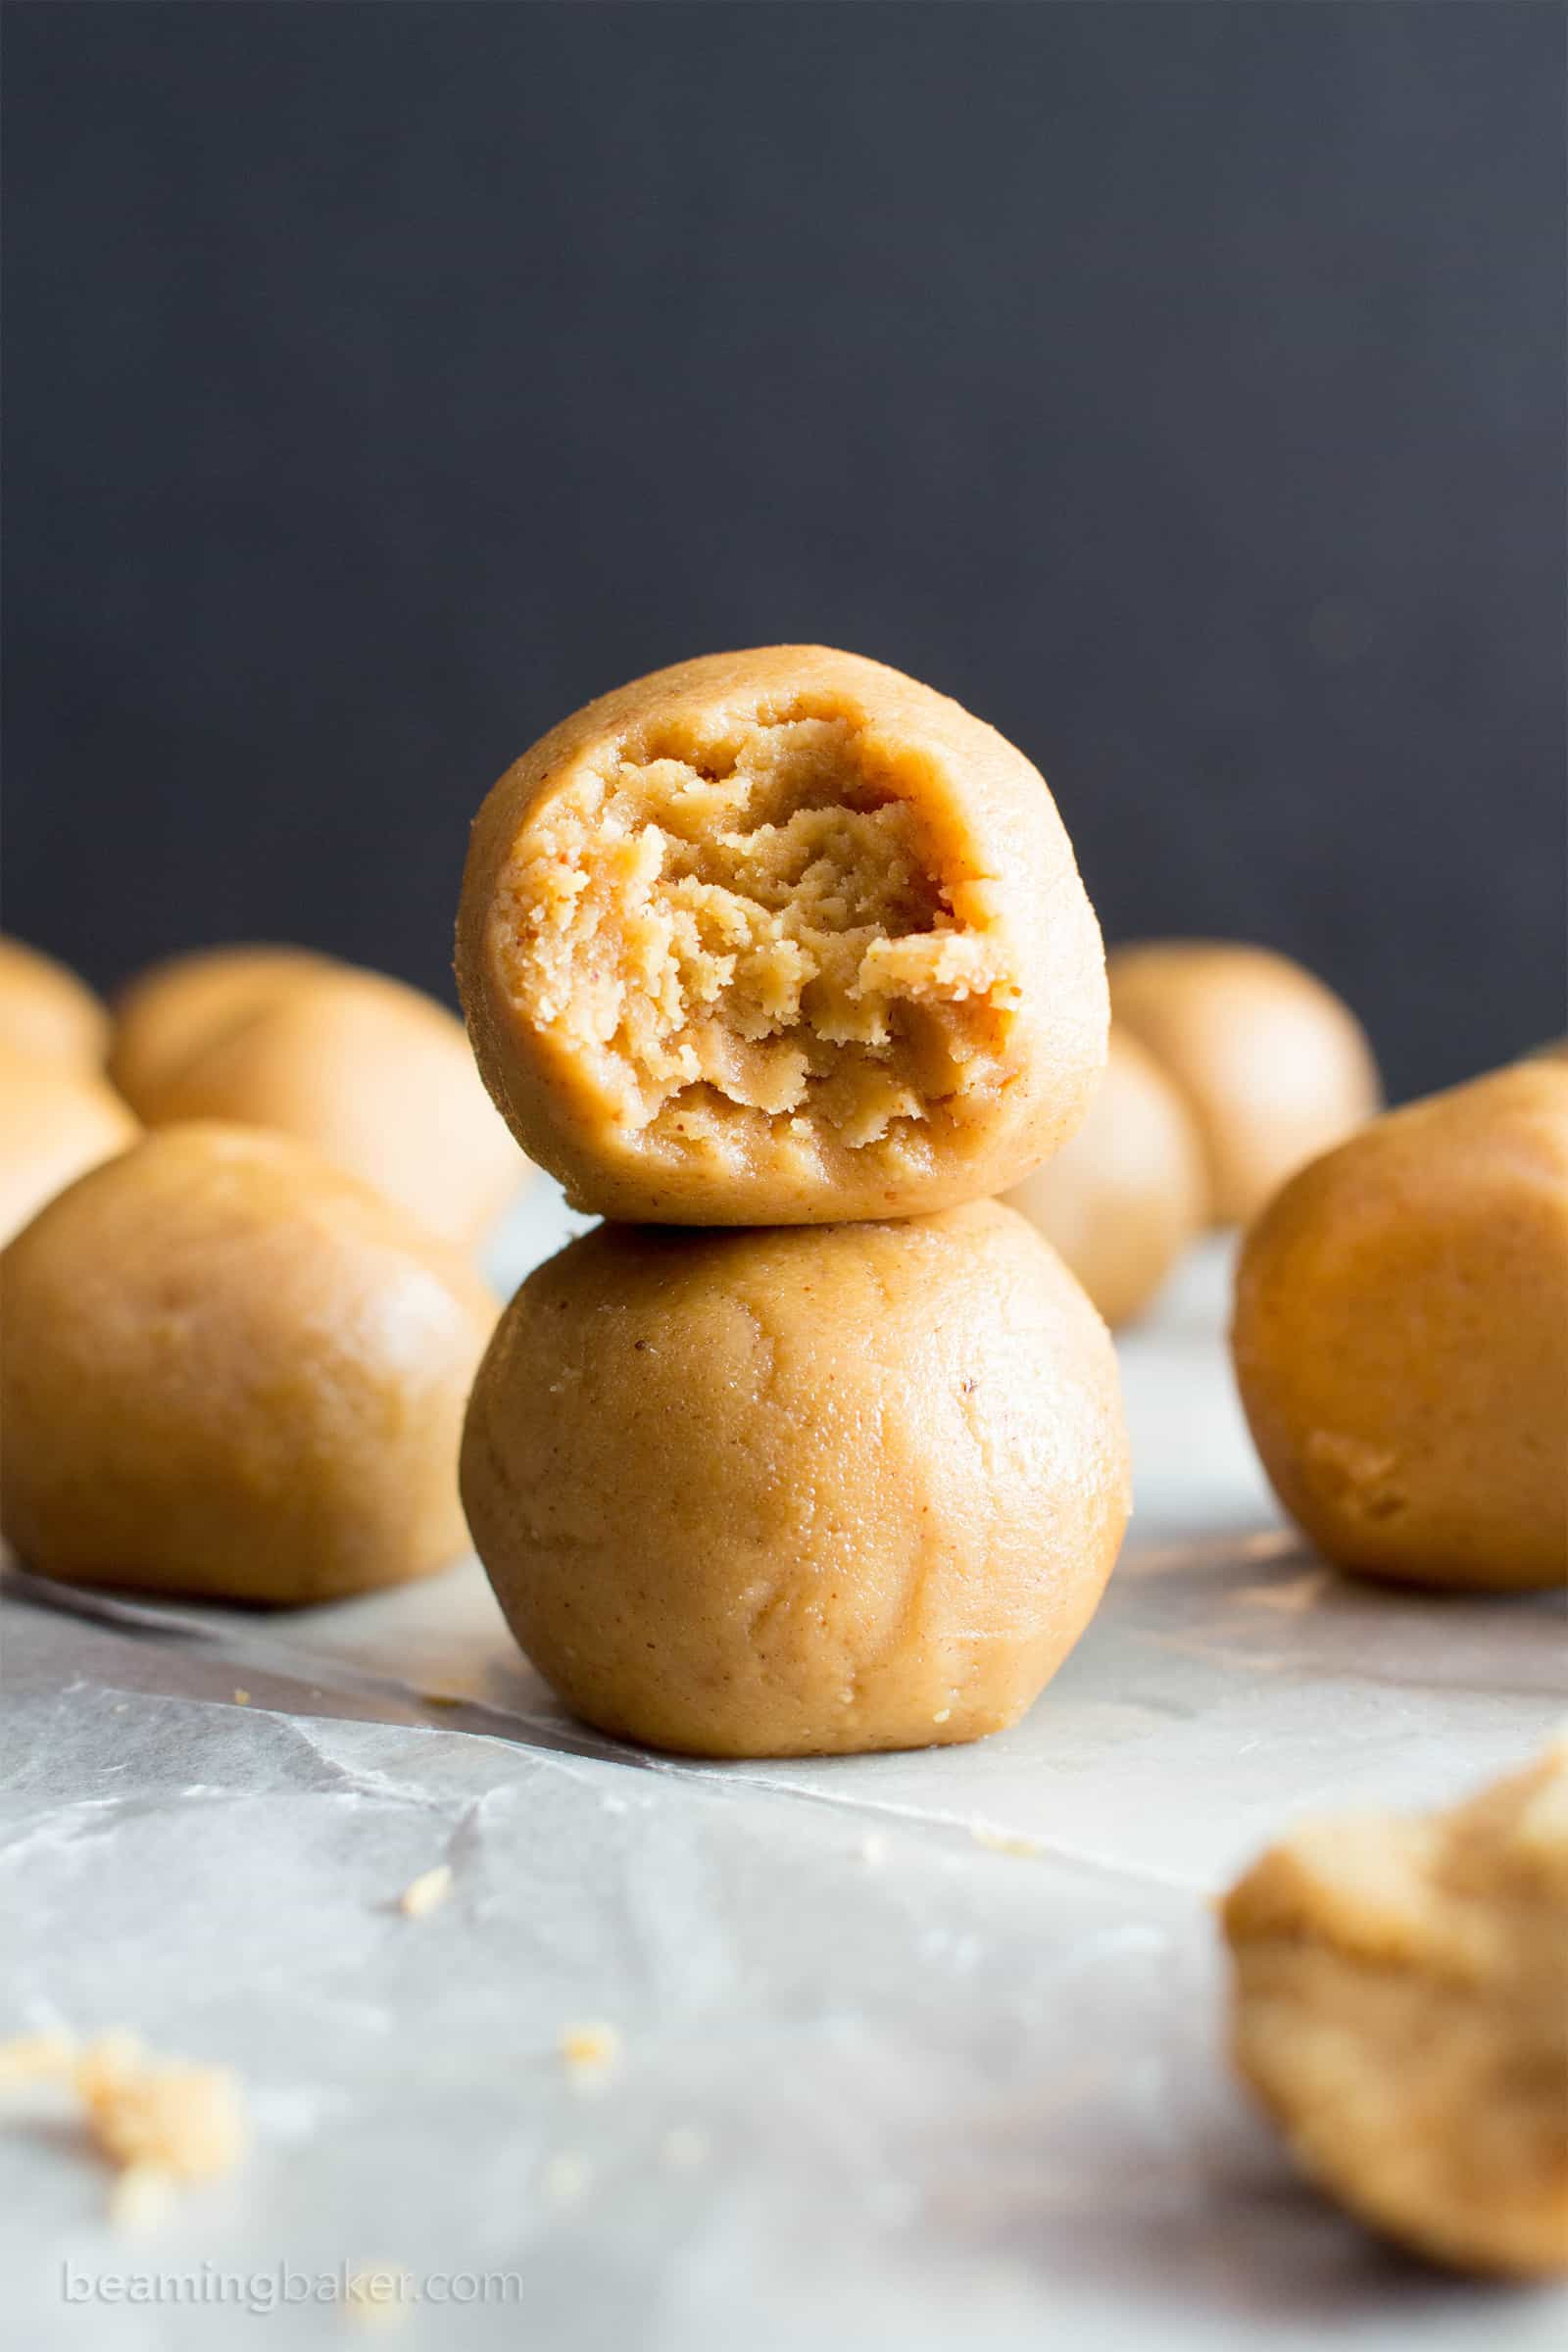 Healthy Snacks With Peanut Butter
 3 Ingre nt Peanut Butter No Bake Energy Bites Recipe